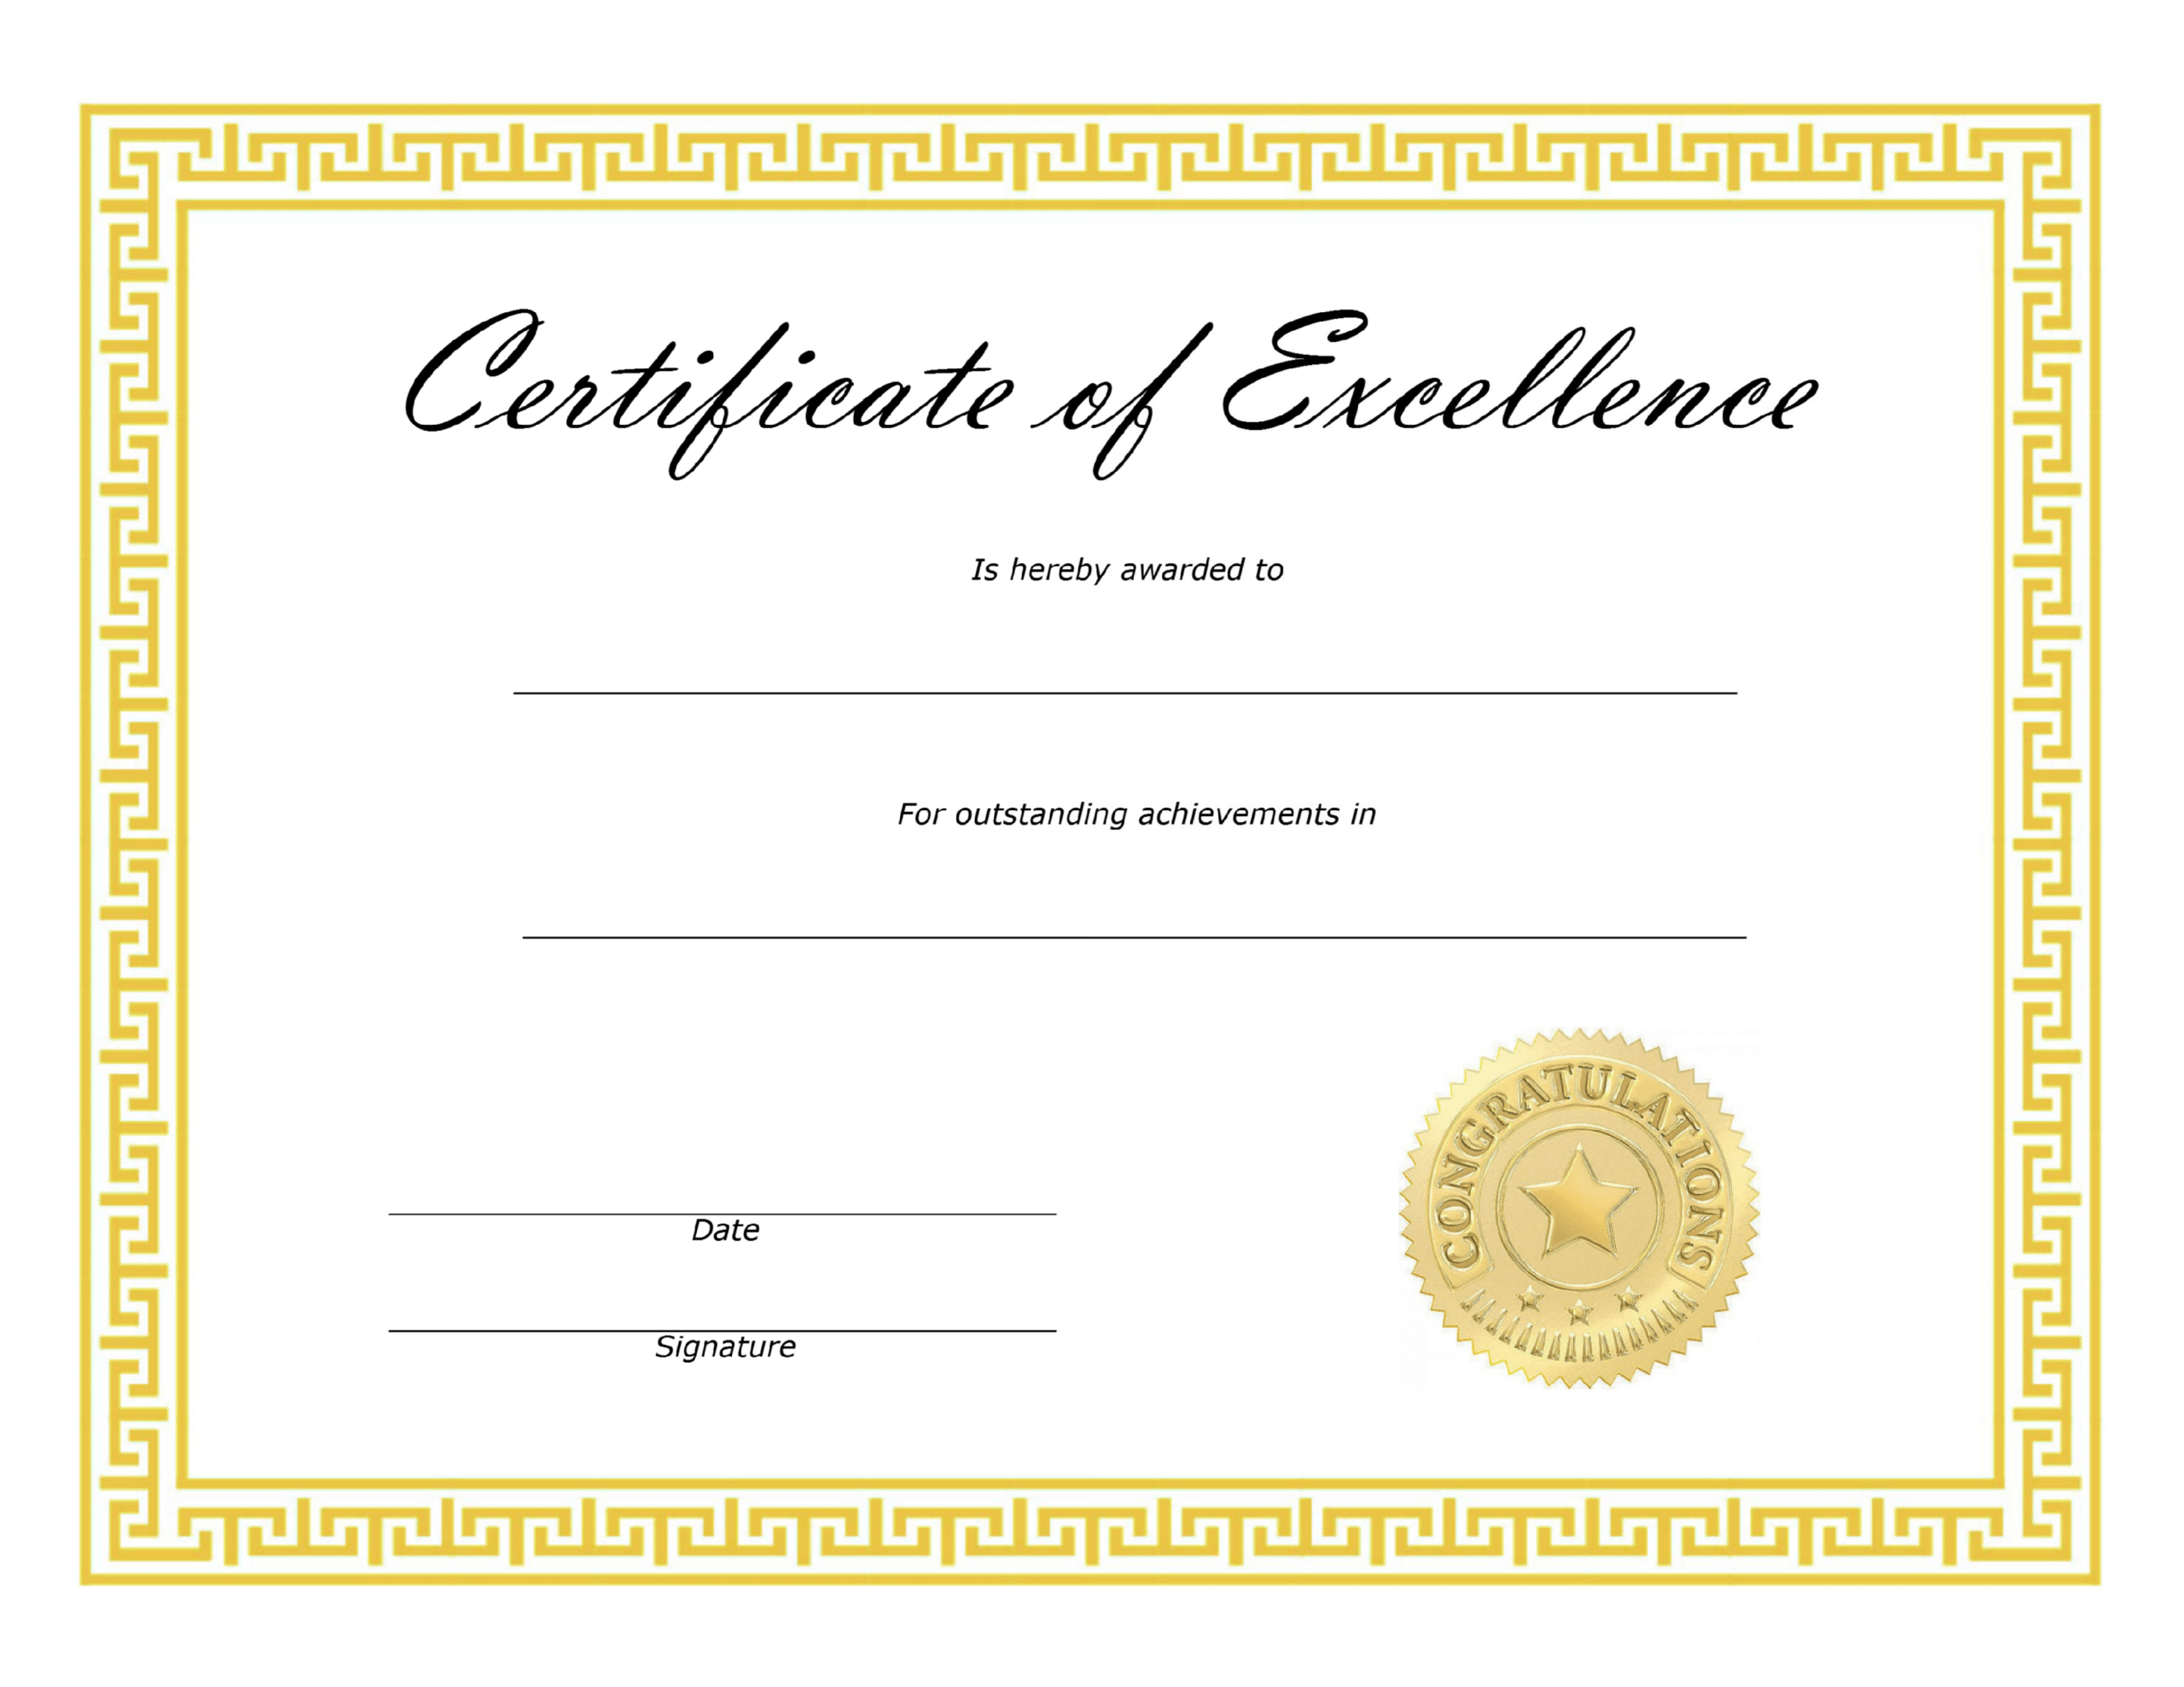 ❤️ Free Sample Certificate Of Excellence Templates❤️ With Certificate Of Excellence Template Free Download